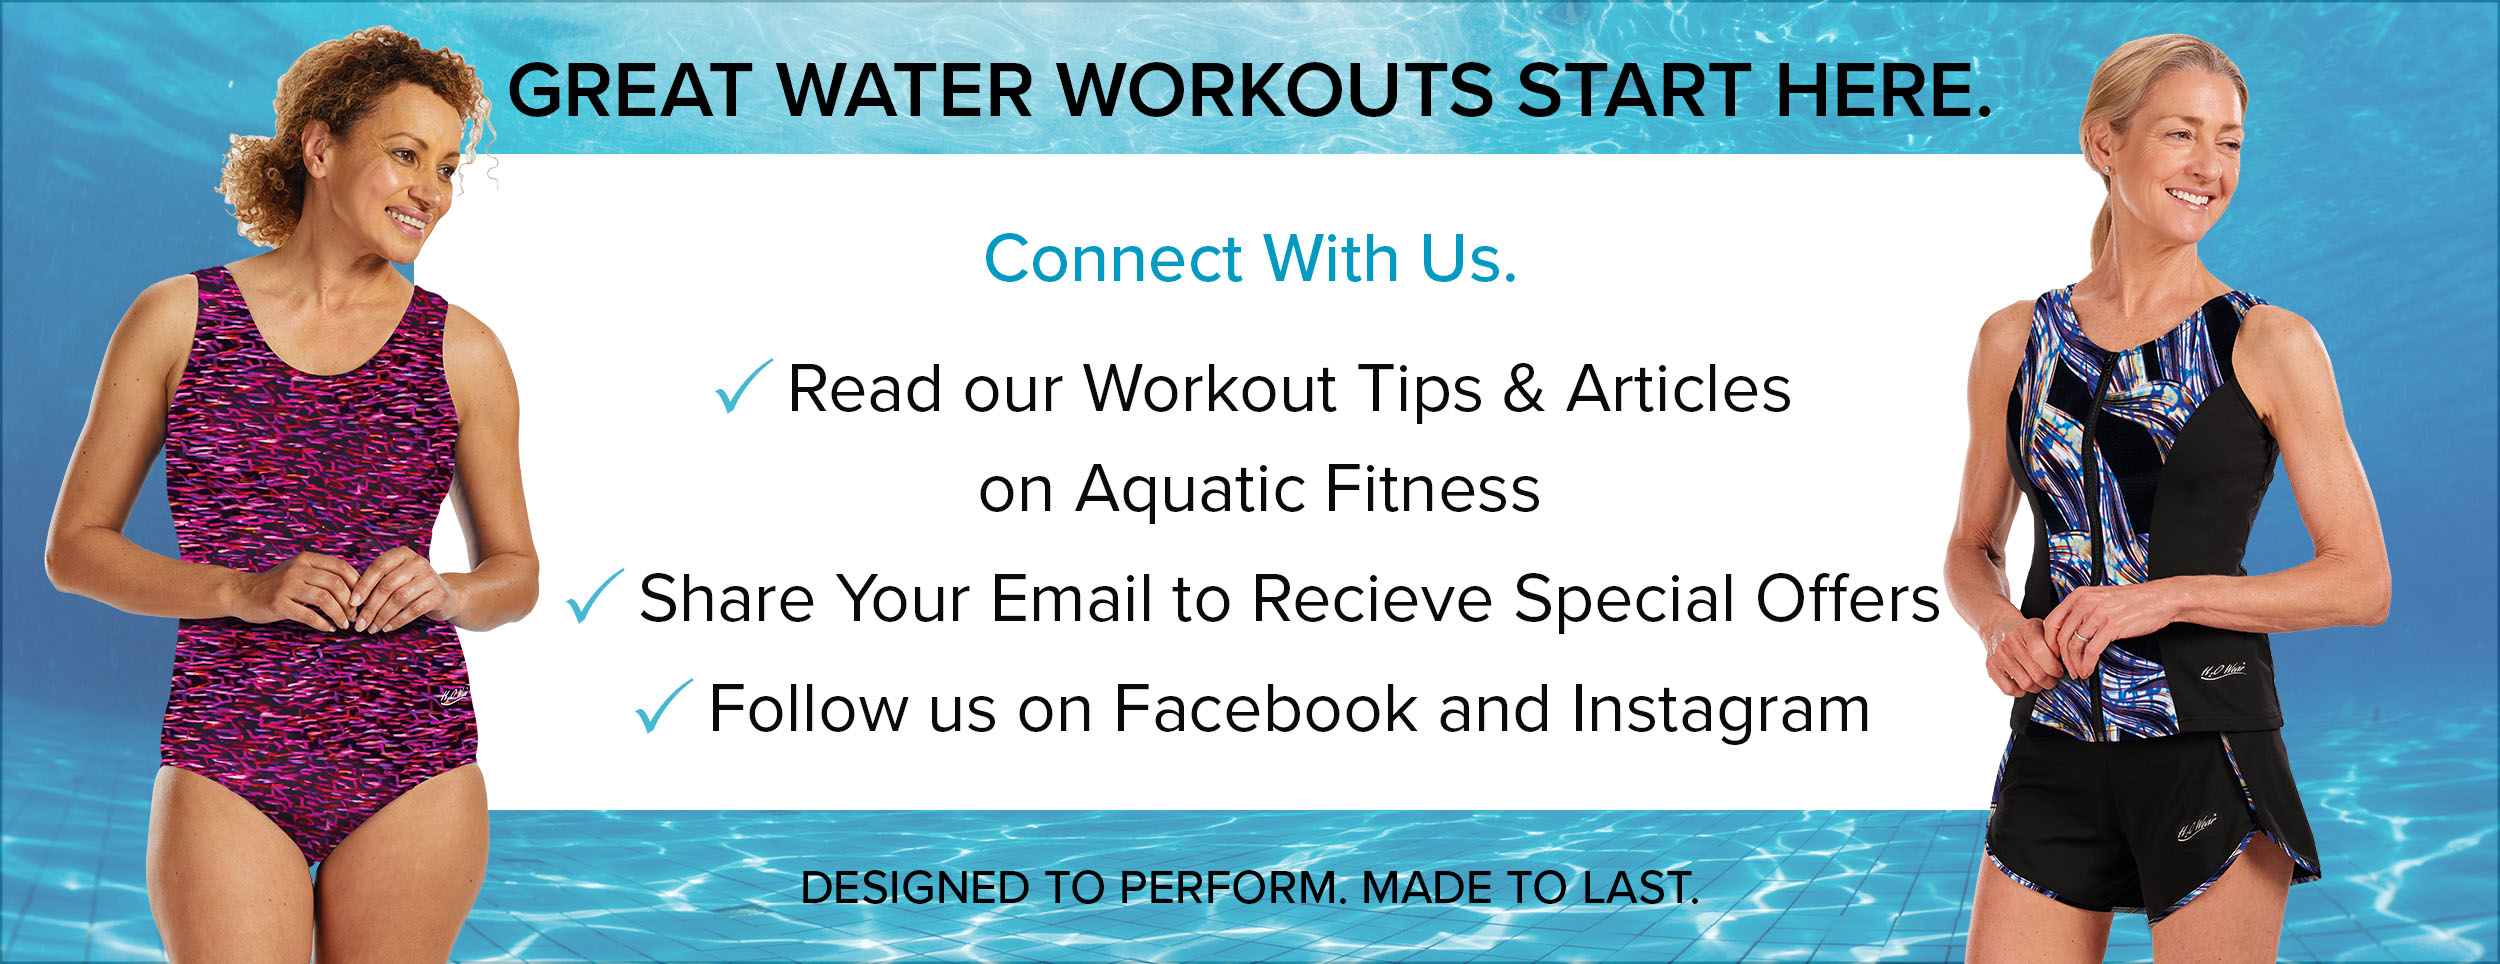 Great Water Workouts Start Here